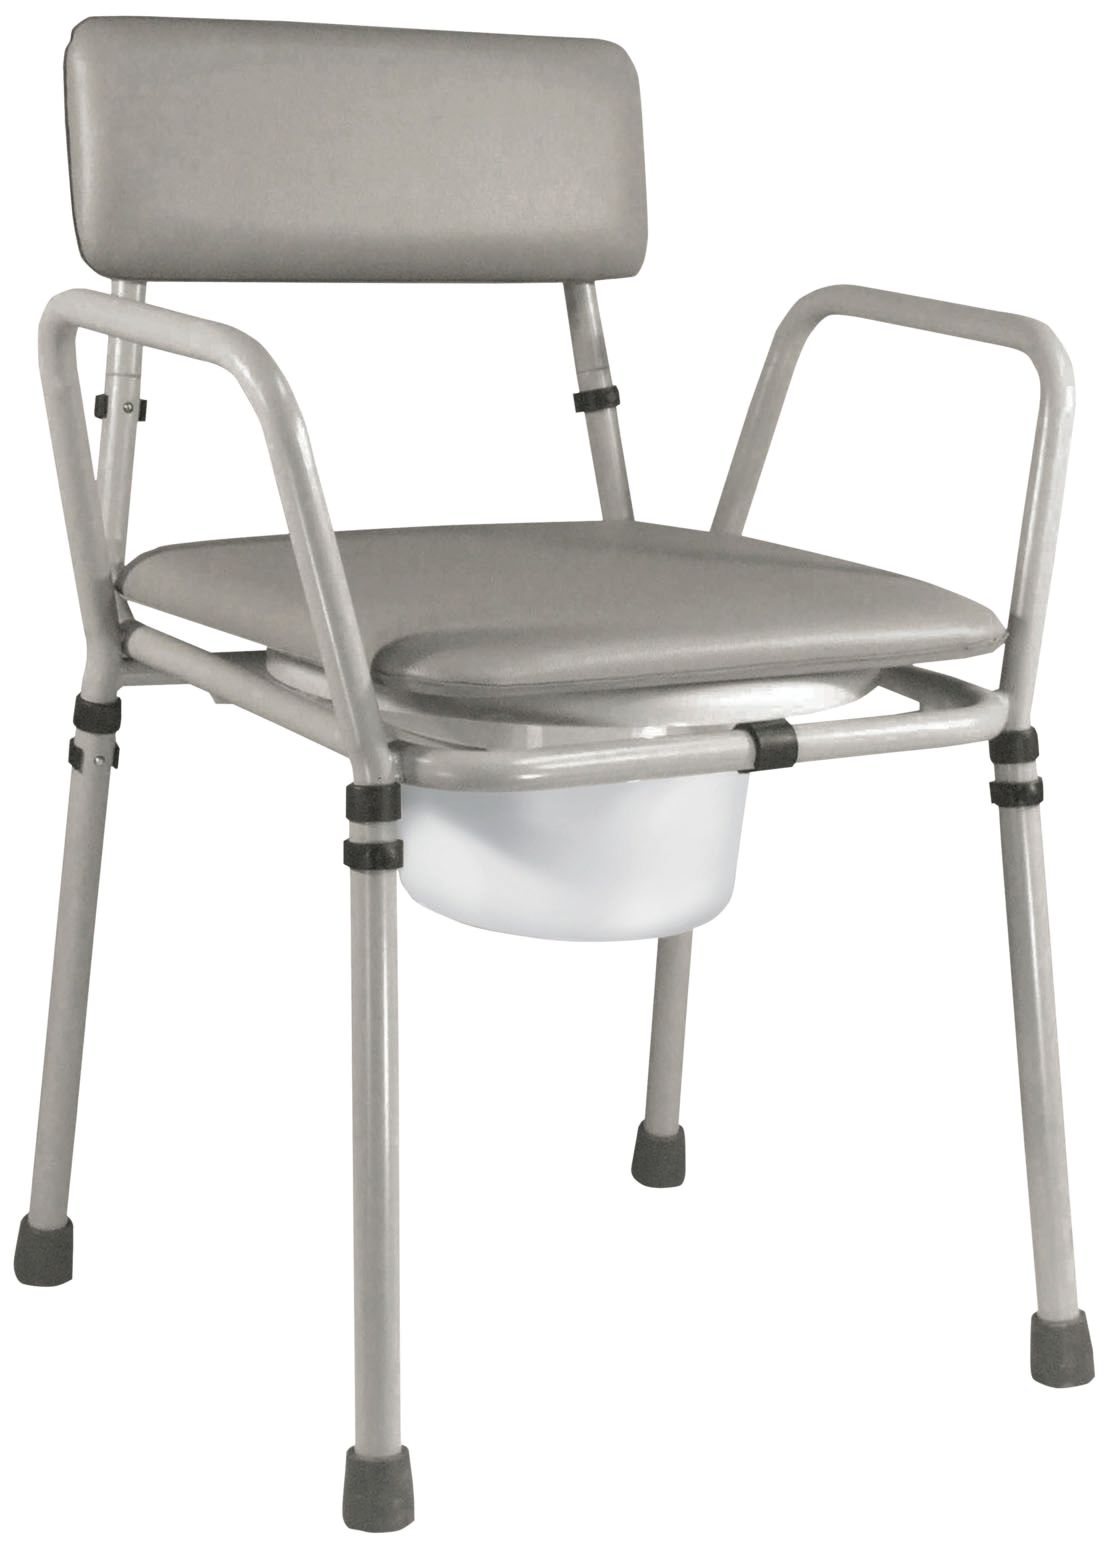 Essex Height Adjustable Commode Chair 2